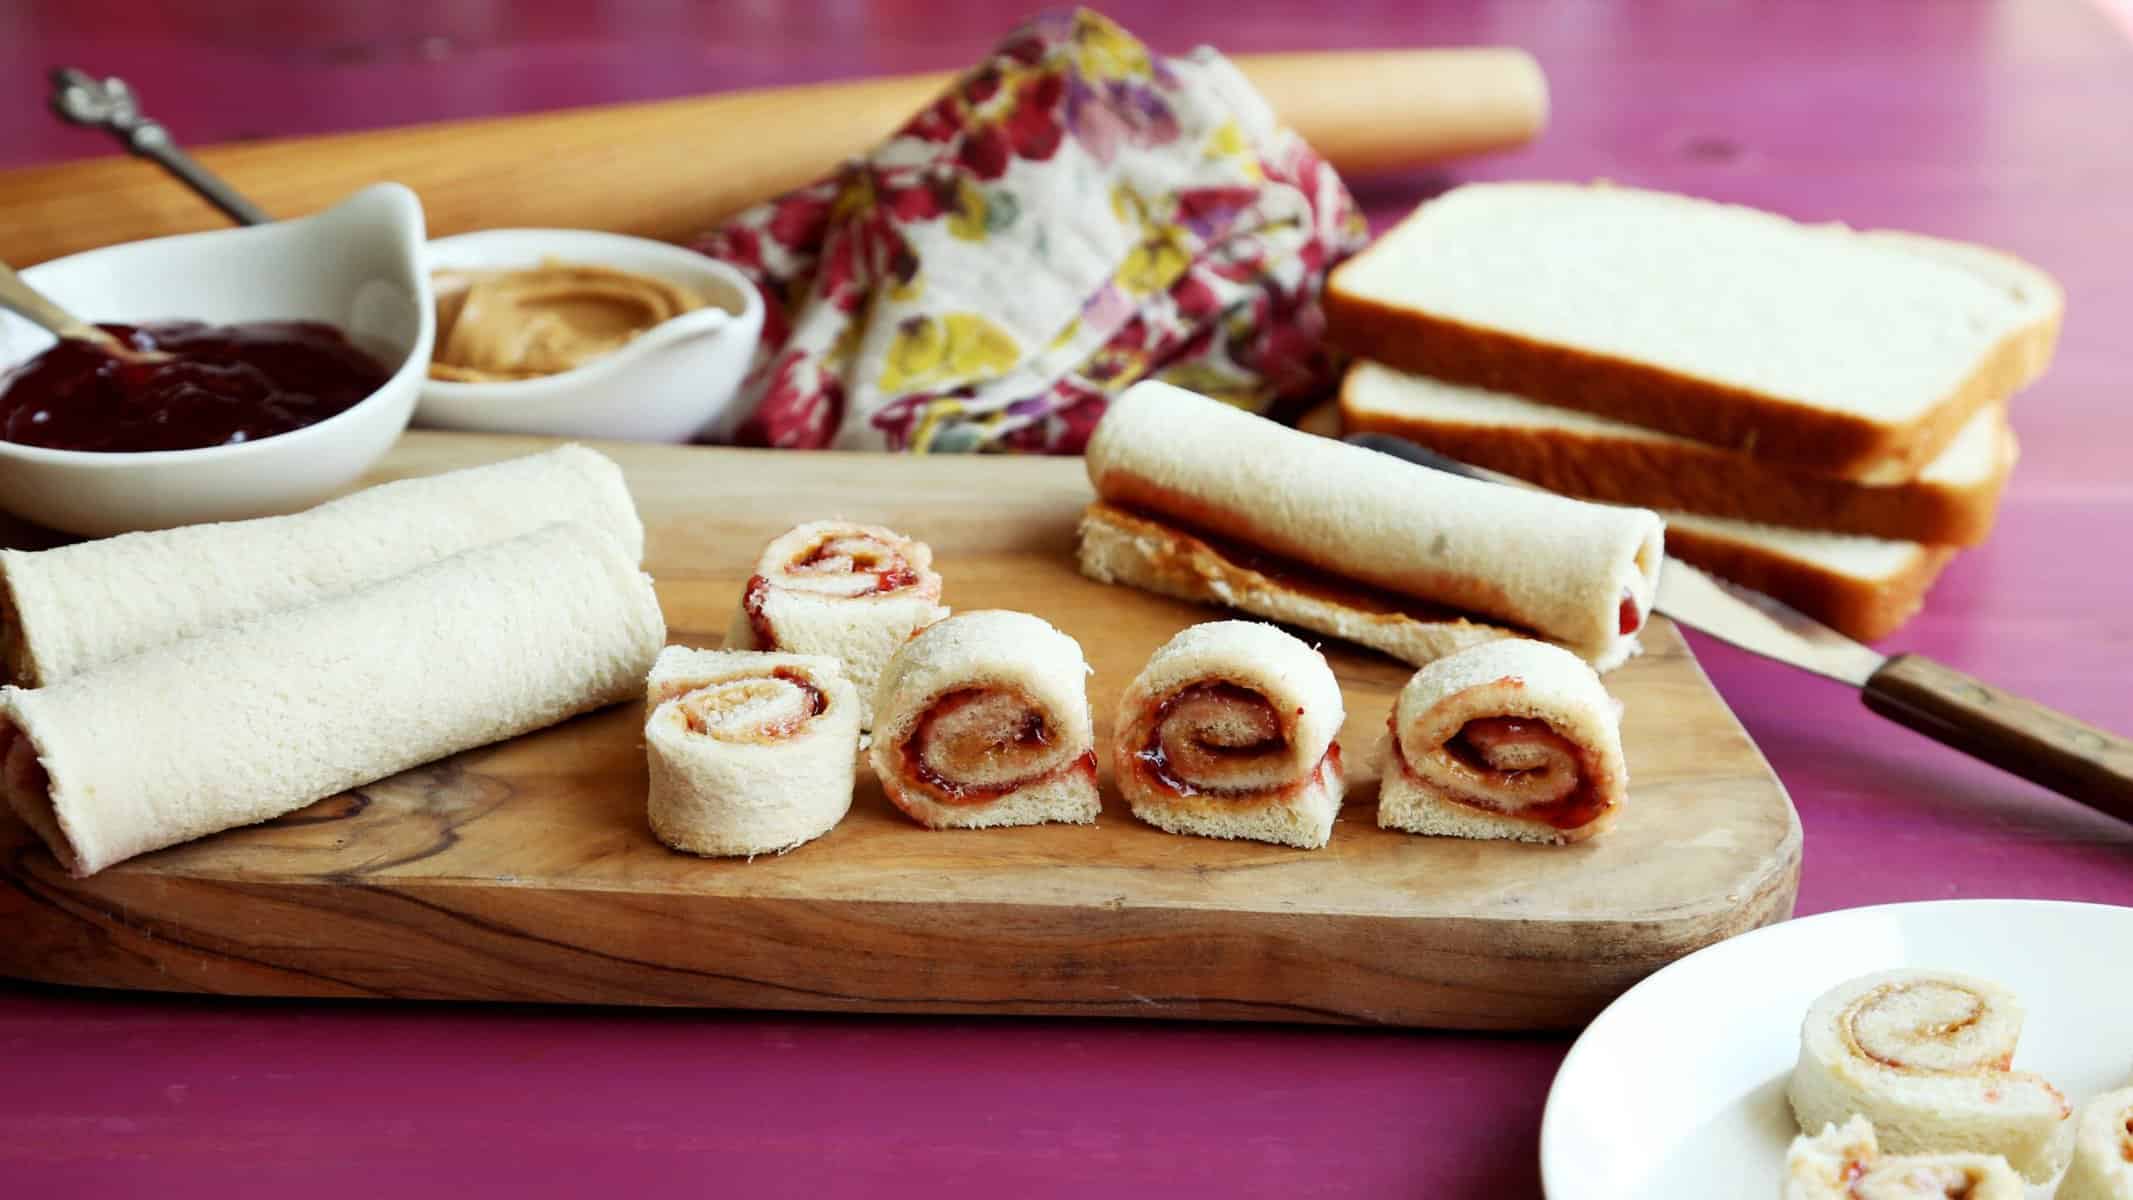  The bright colors of my jelly roll make it a beautiful addition to any Passover table.